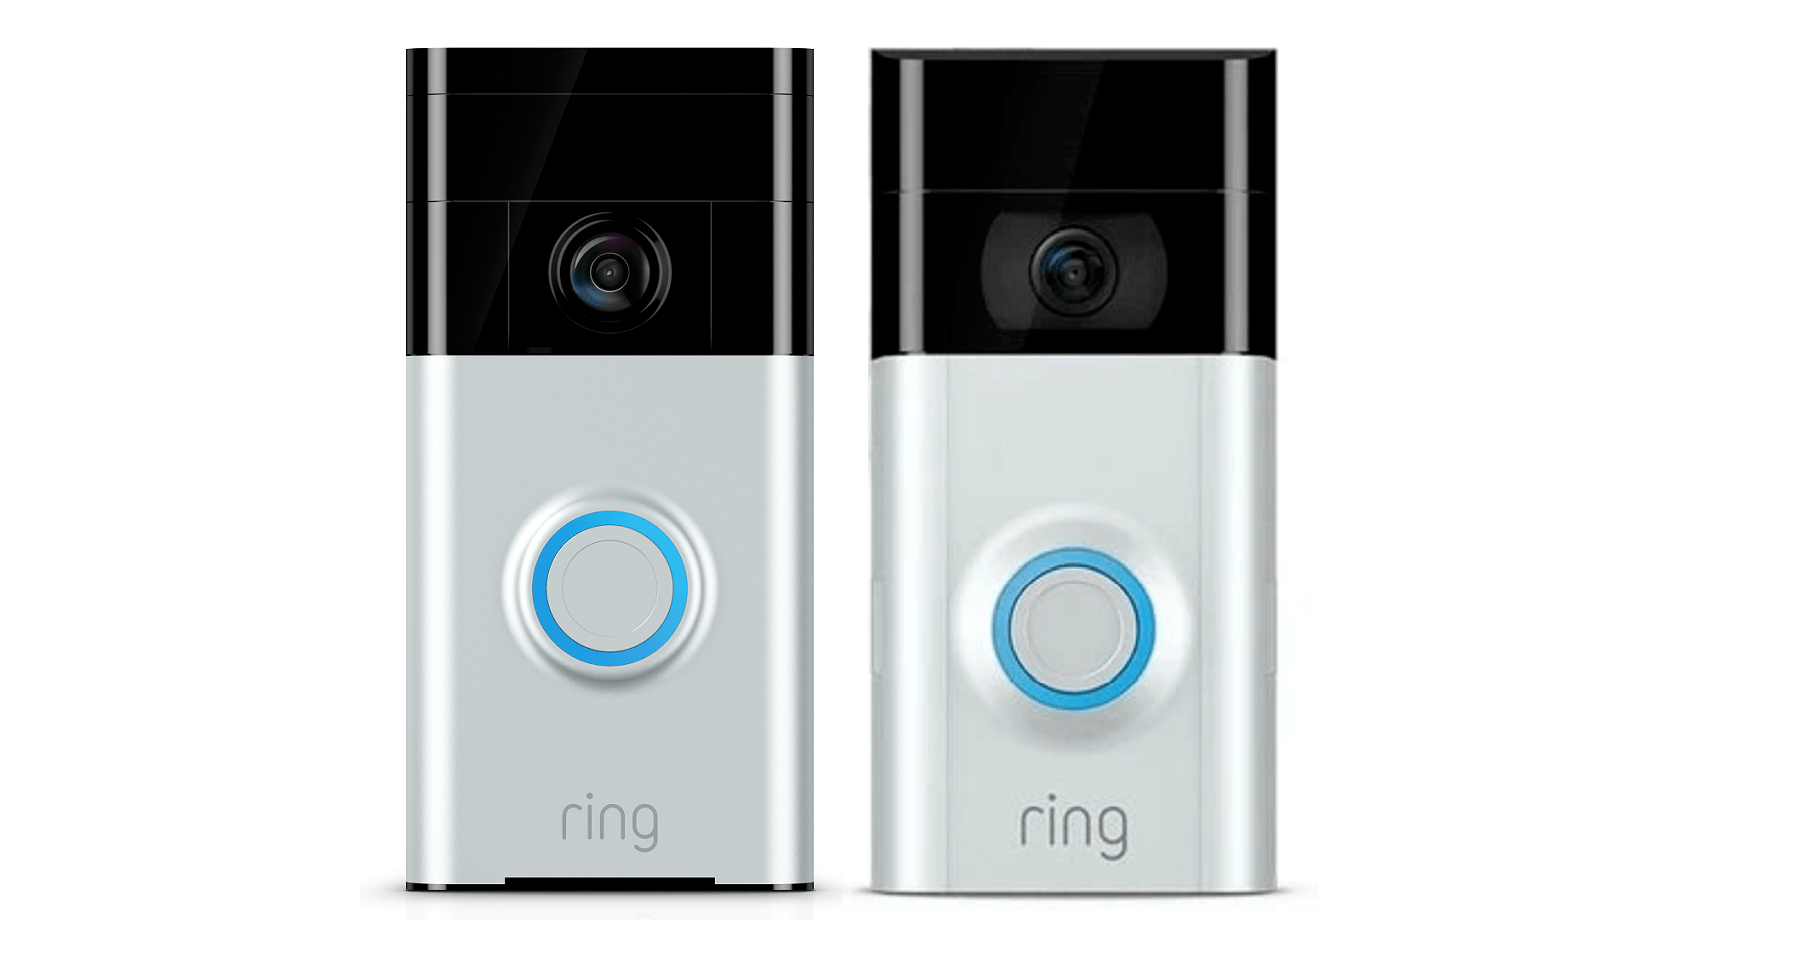 where can i buy ring doorbell 2